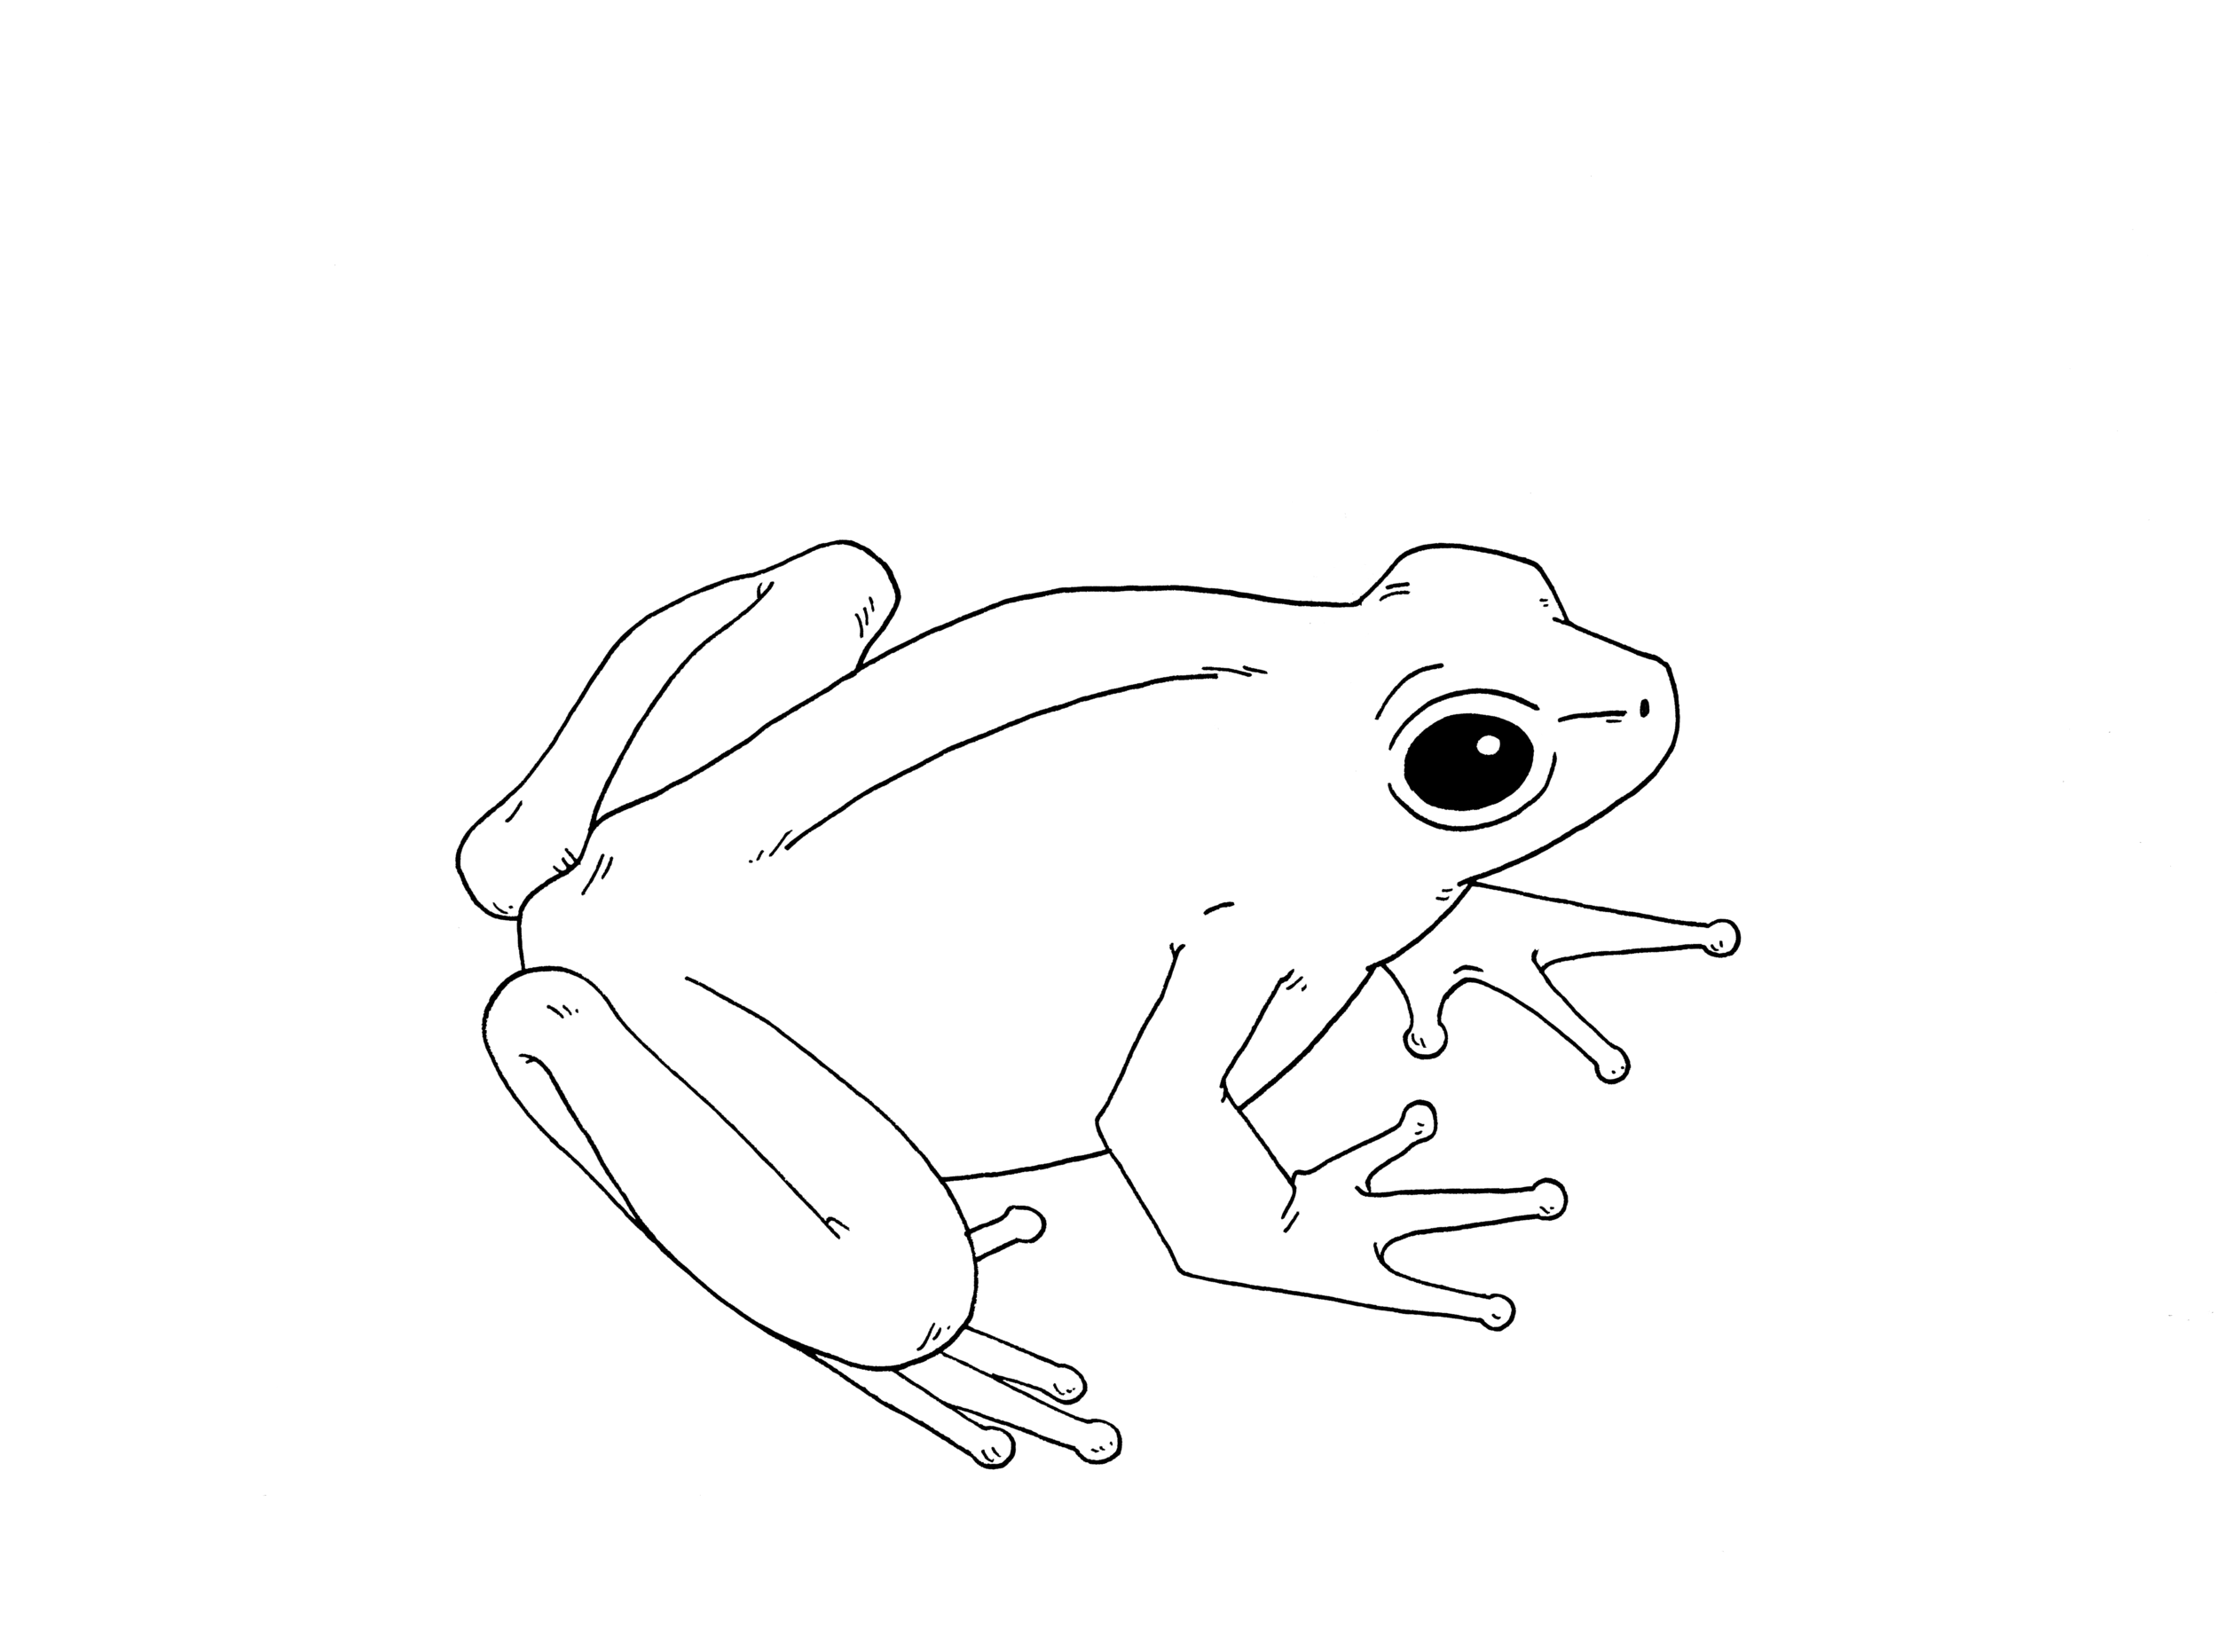 8 Easy Cute Frog Drawing Tutorials for Beginners and Kids-saigonsouth.com.vn